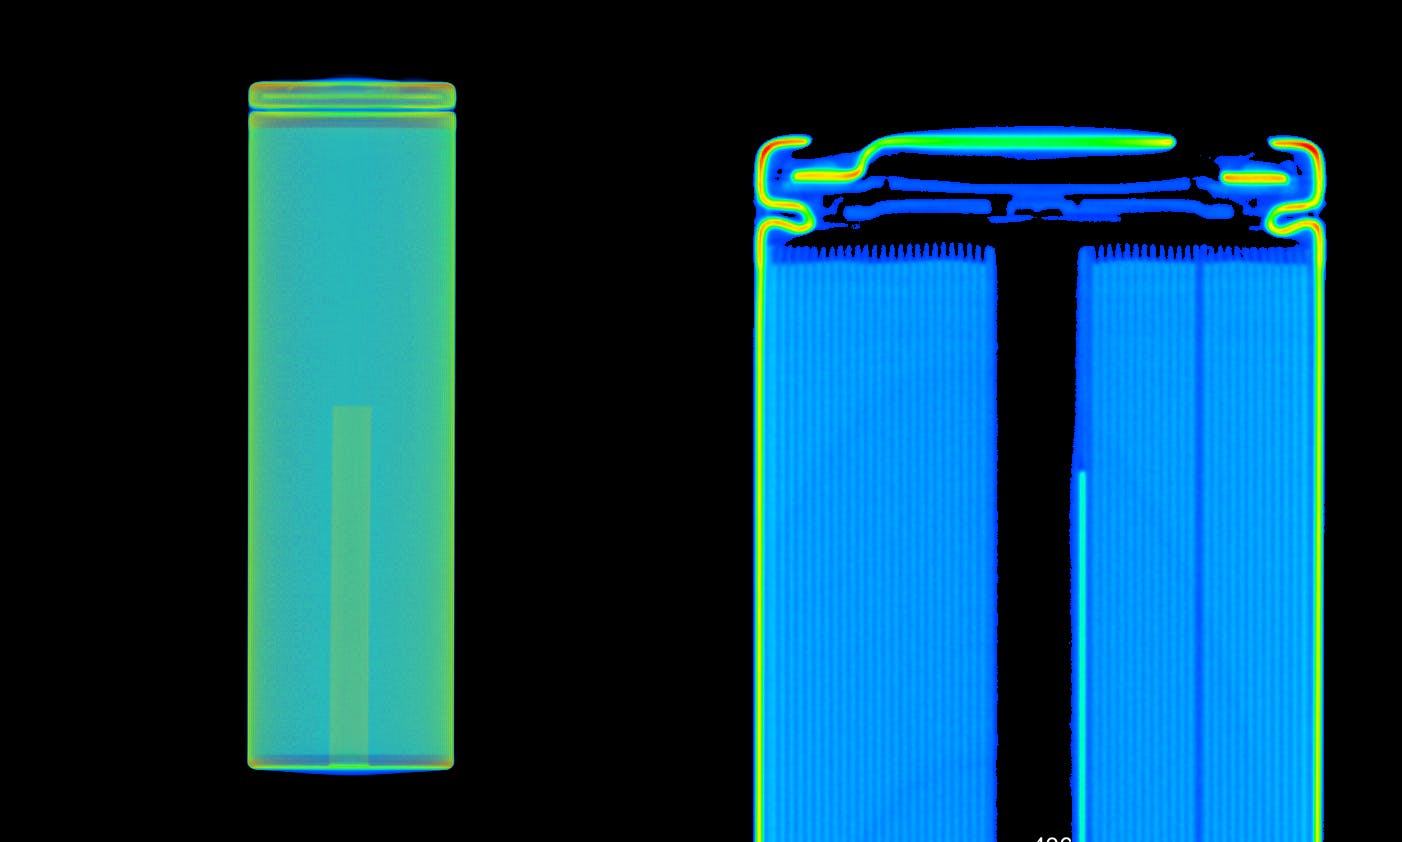 Lumafield 3D industrial CT scans of the lithium-ion LG21700 battery that powers the Tesla Model Y